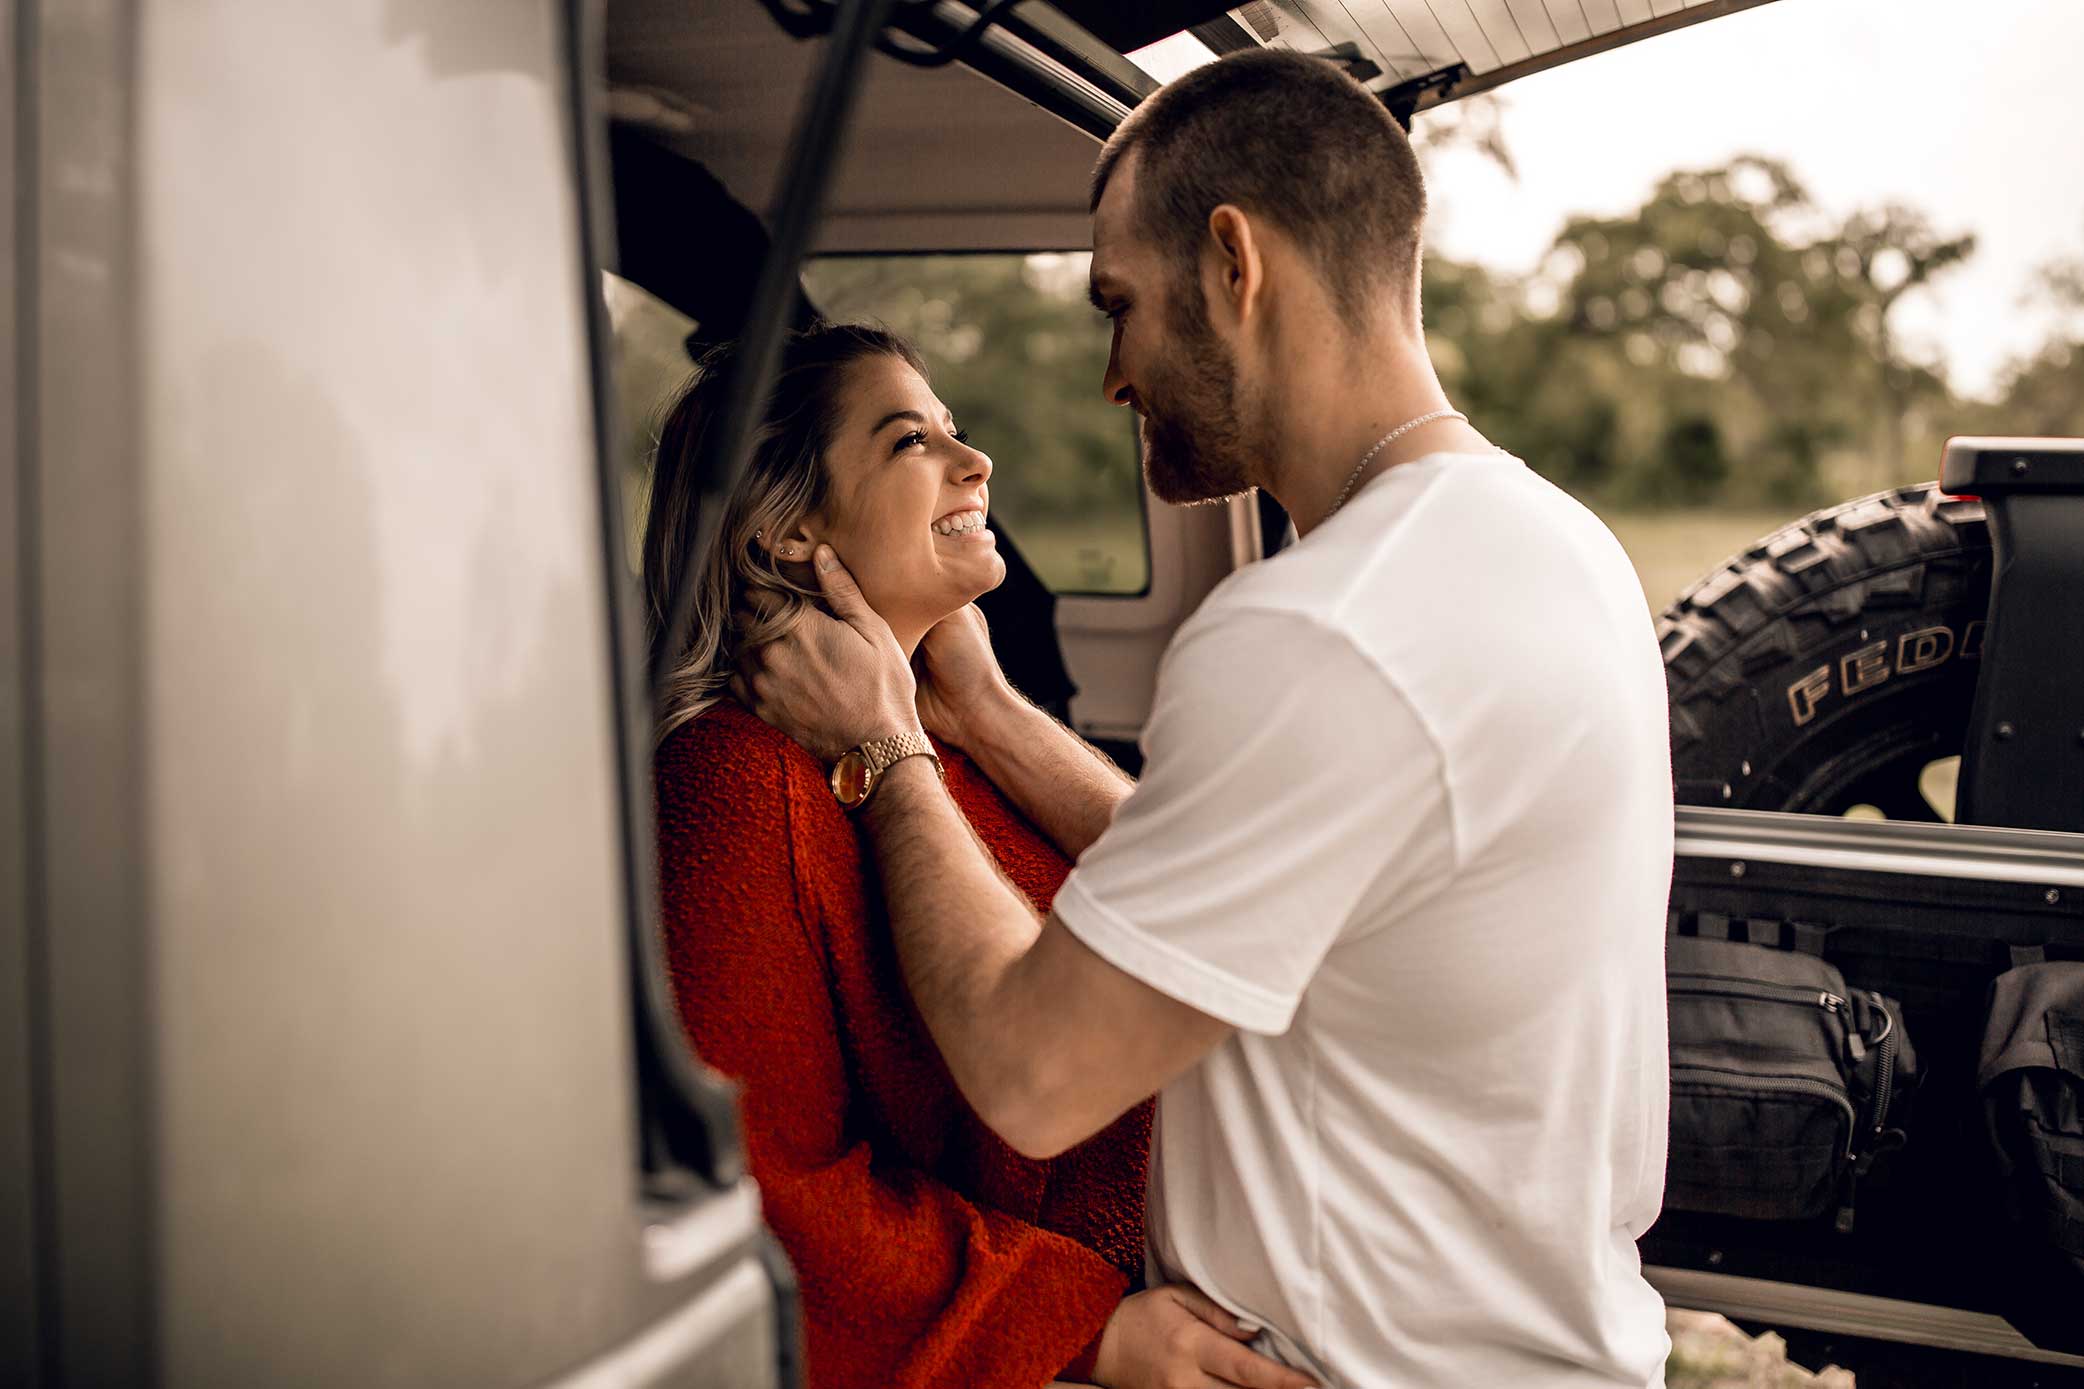 shelby-schiller-photography-lifestyle-couples-remi-colt-outdoor-jeep-adventure-23.jpg